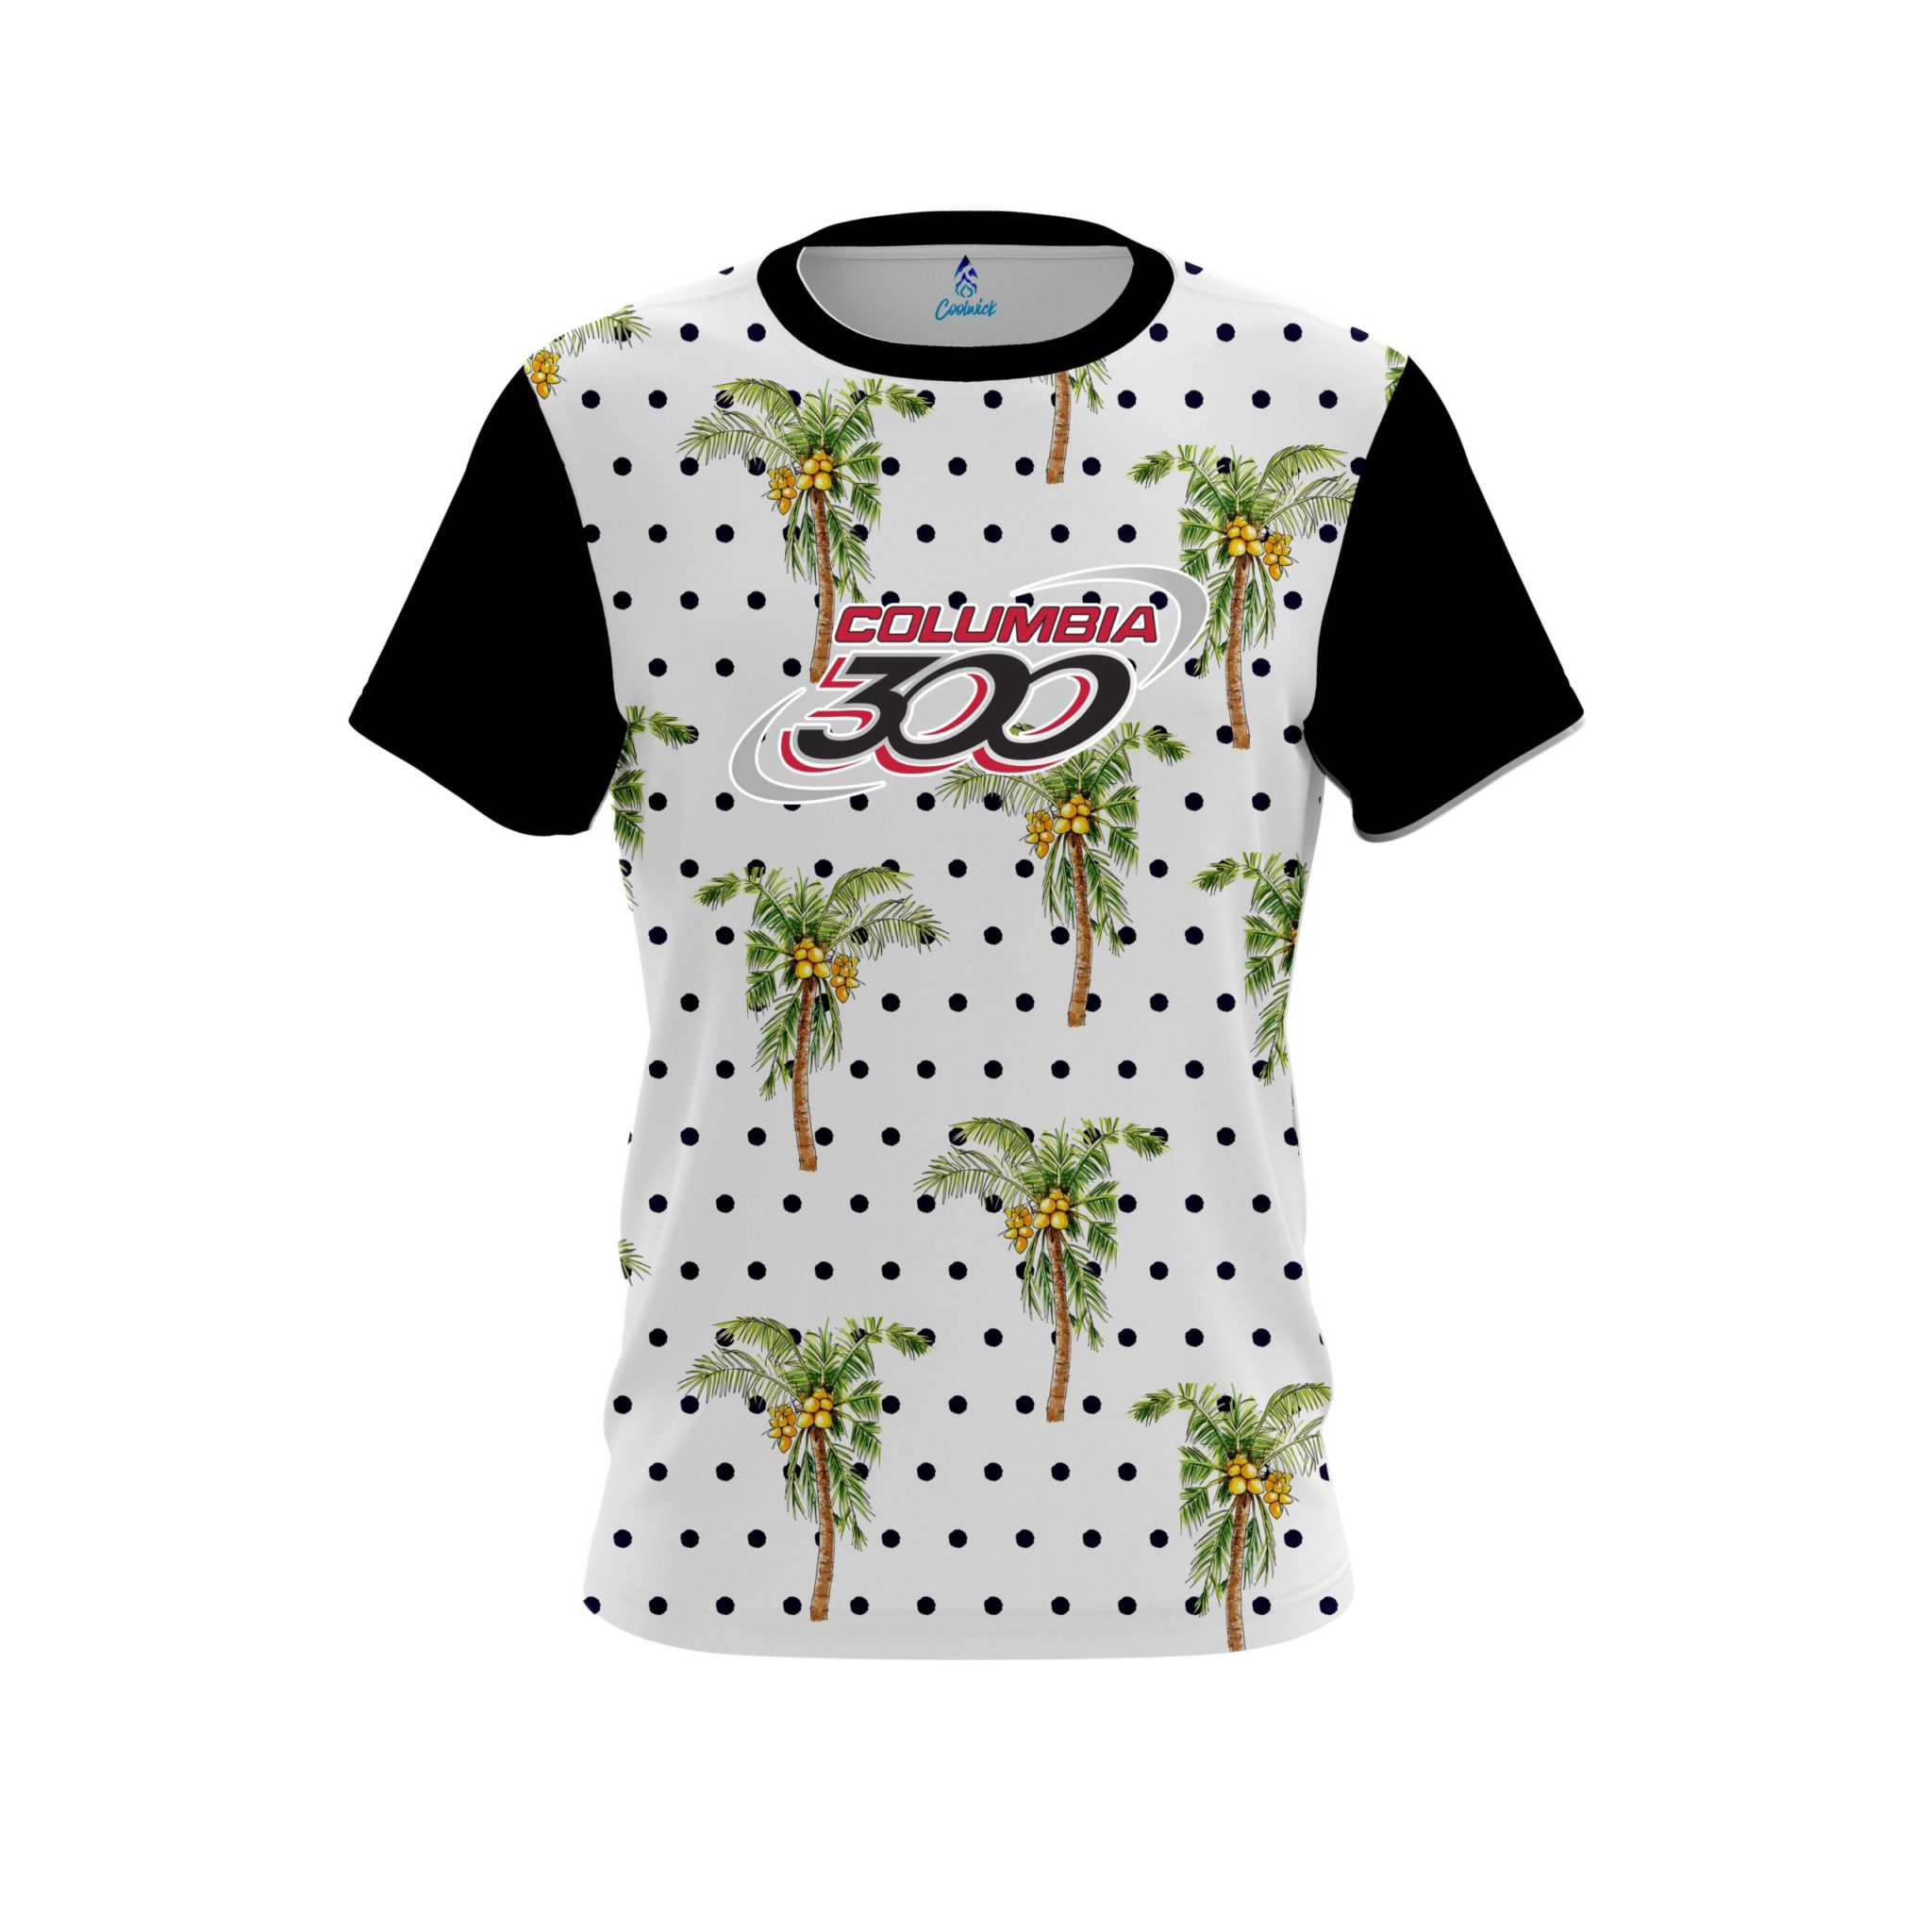 Columbia 300 Polka Dots Palm Trees CoolWick Bowling Jersey